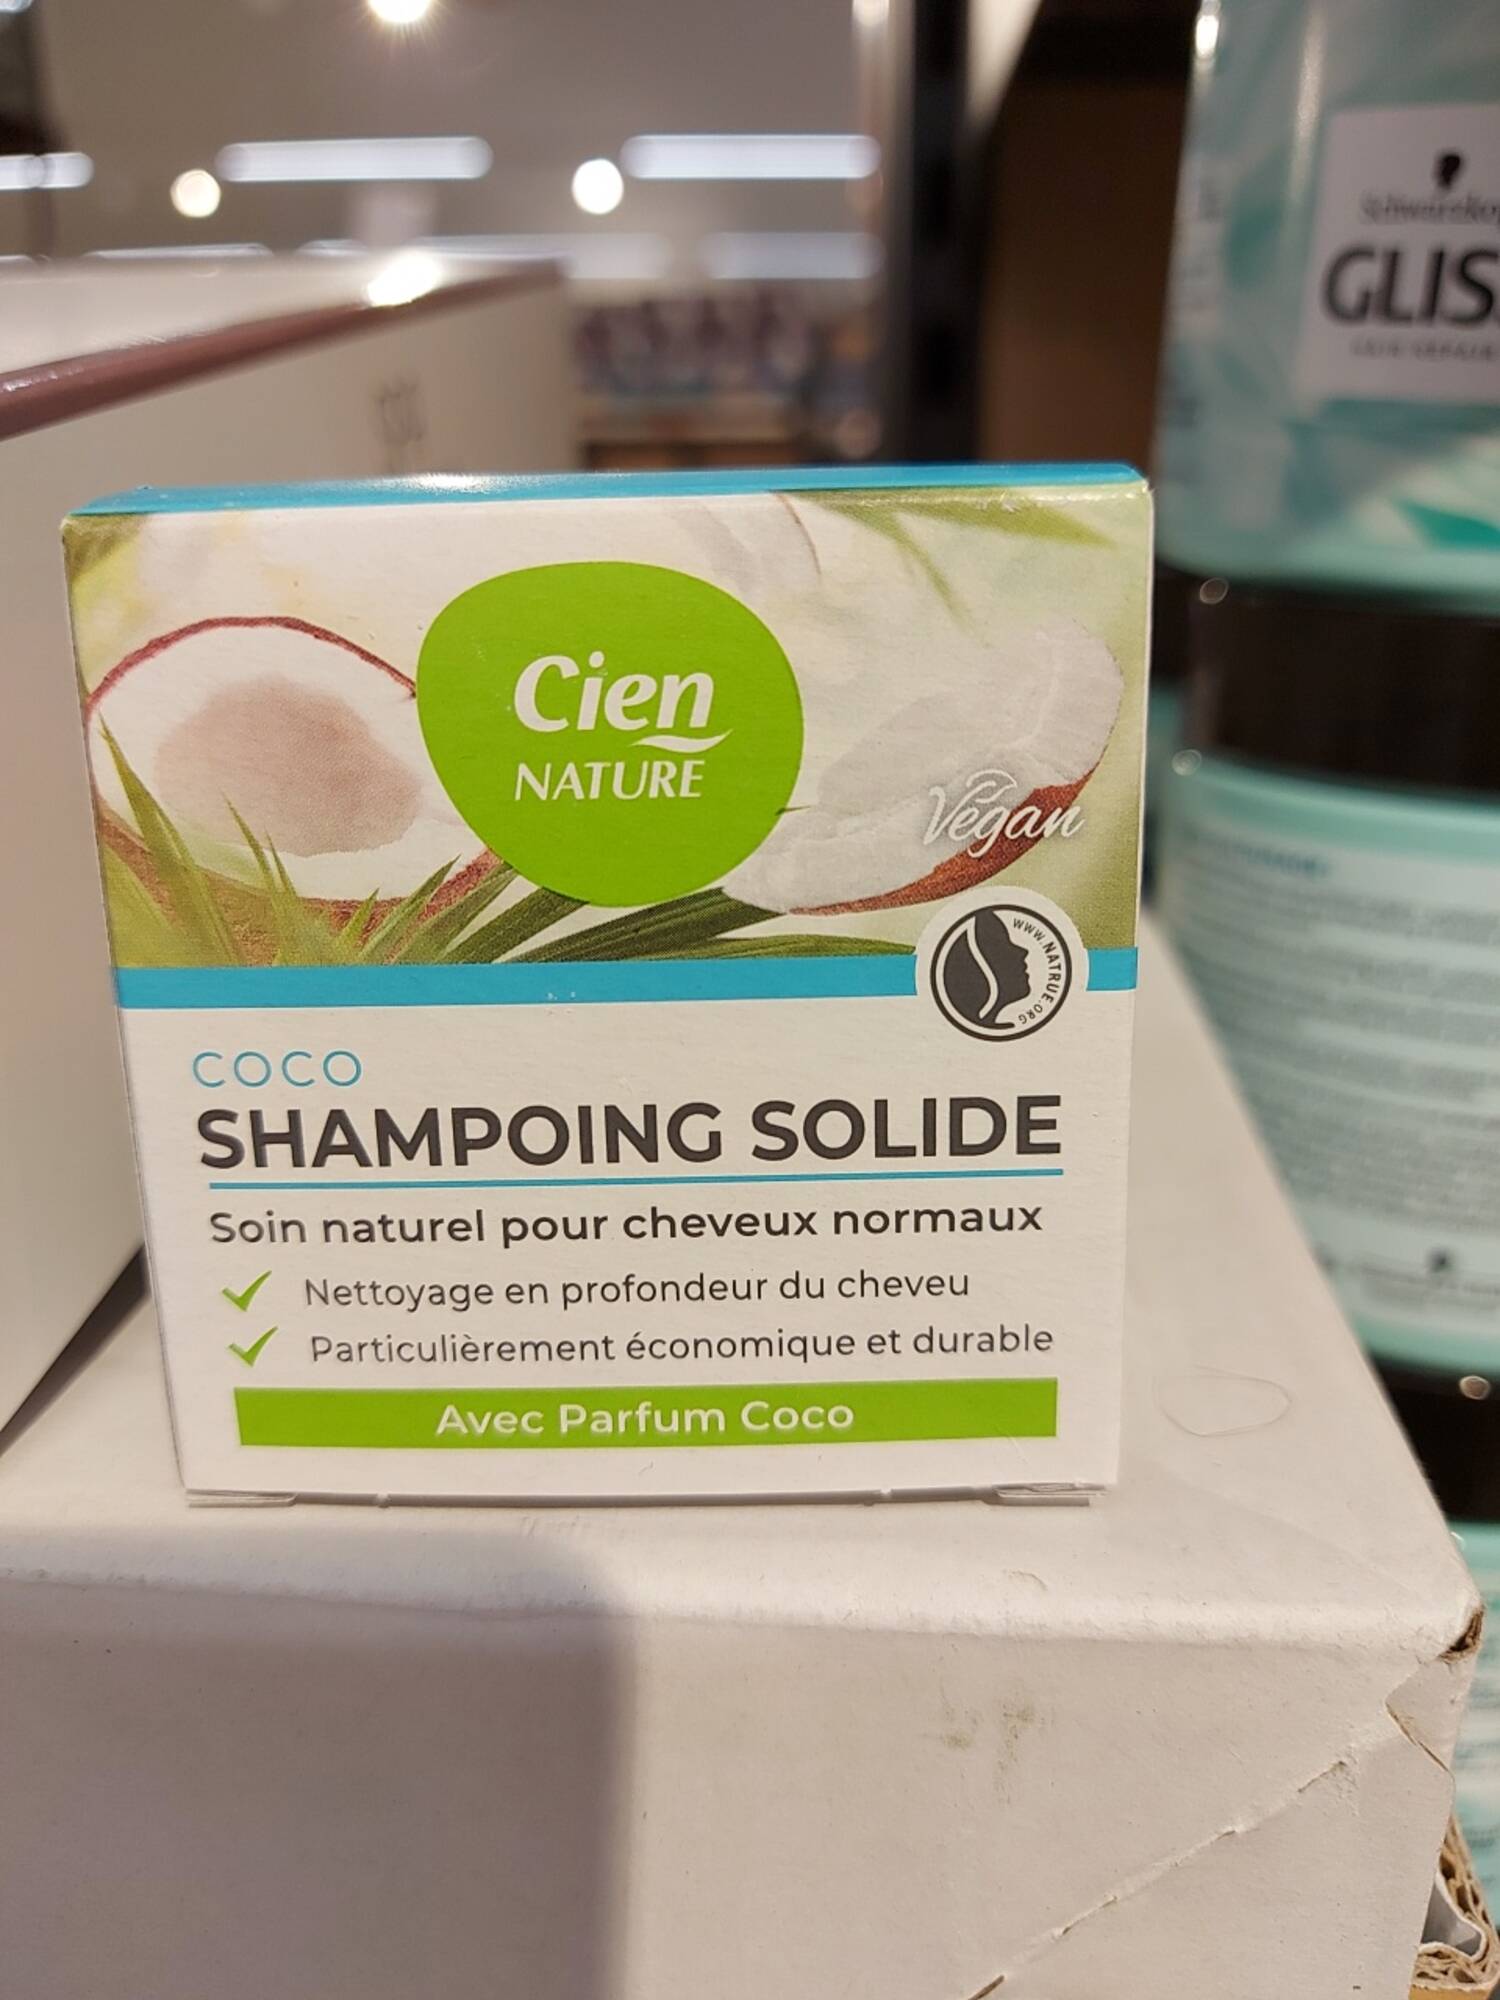 LIDL - Cien nature - Shampooing solide coco